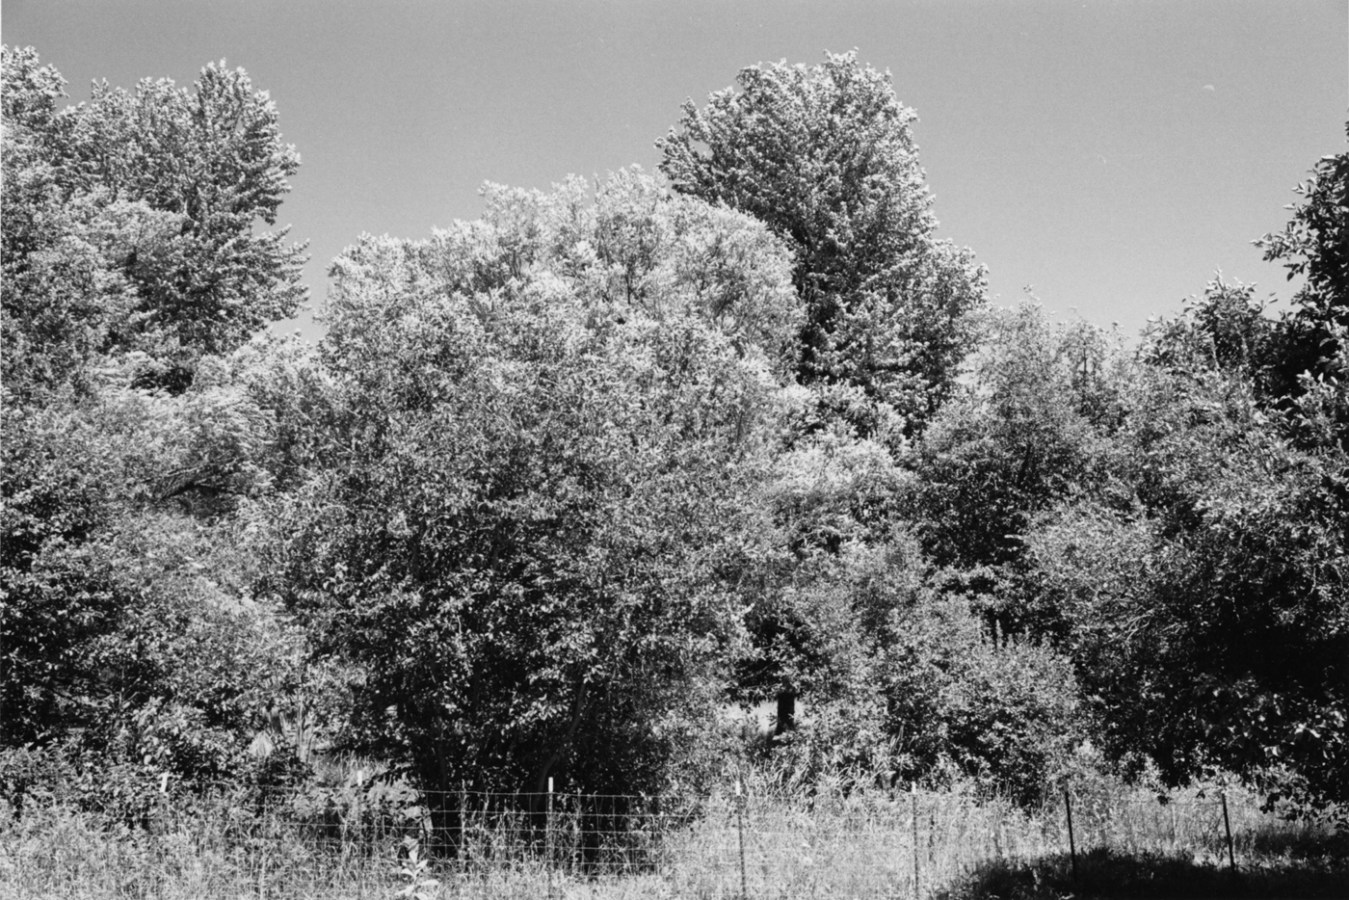 Black-and-white photograph with trees and a wire fence